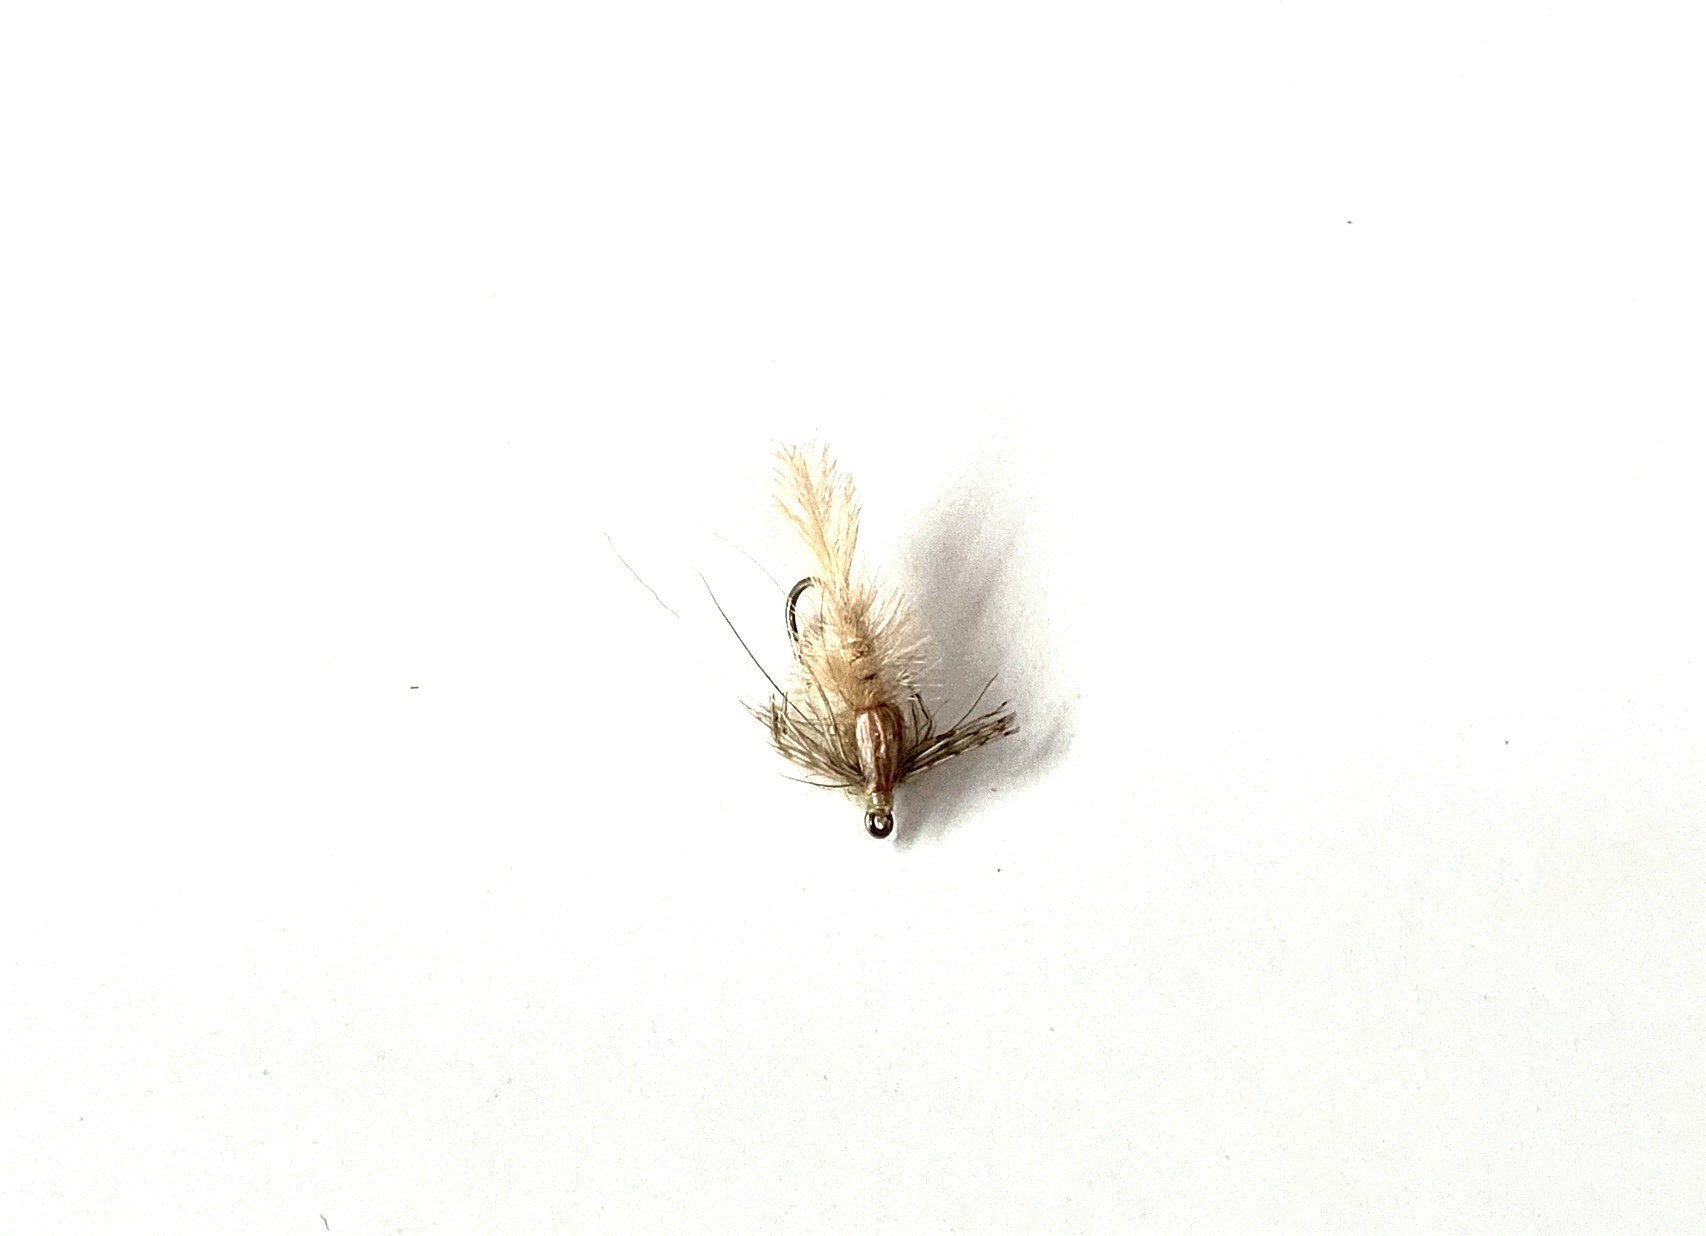 Solitude Fly Company Gilled Nymph